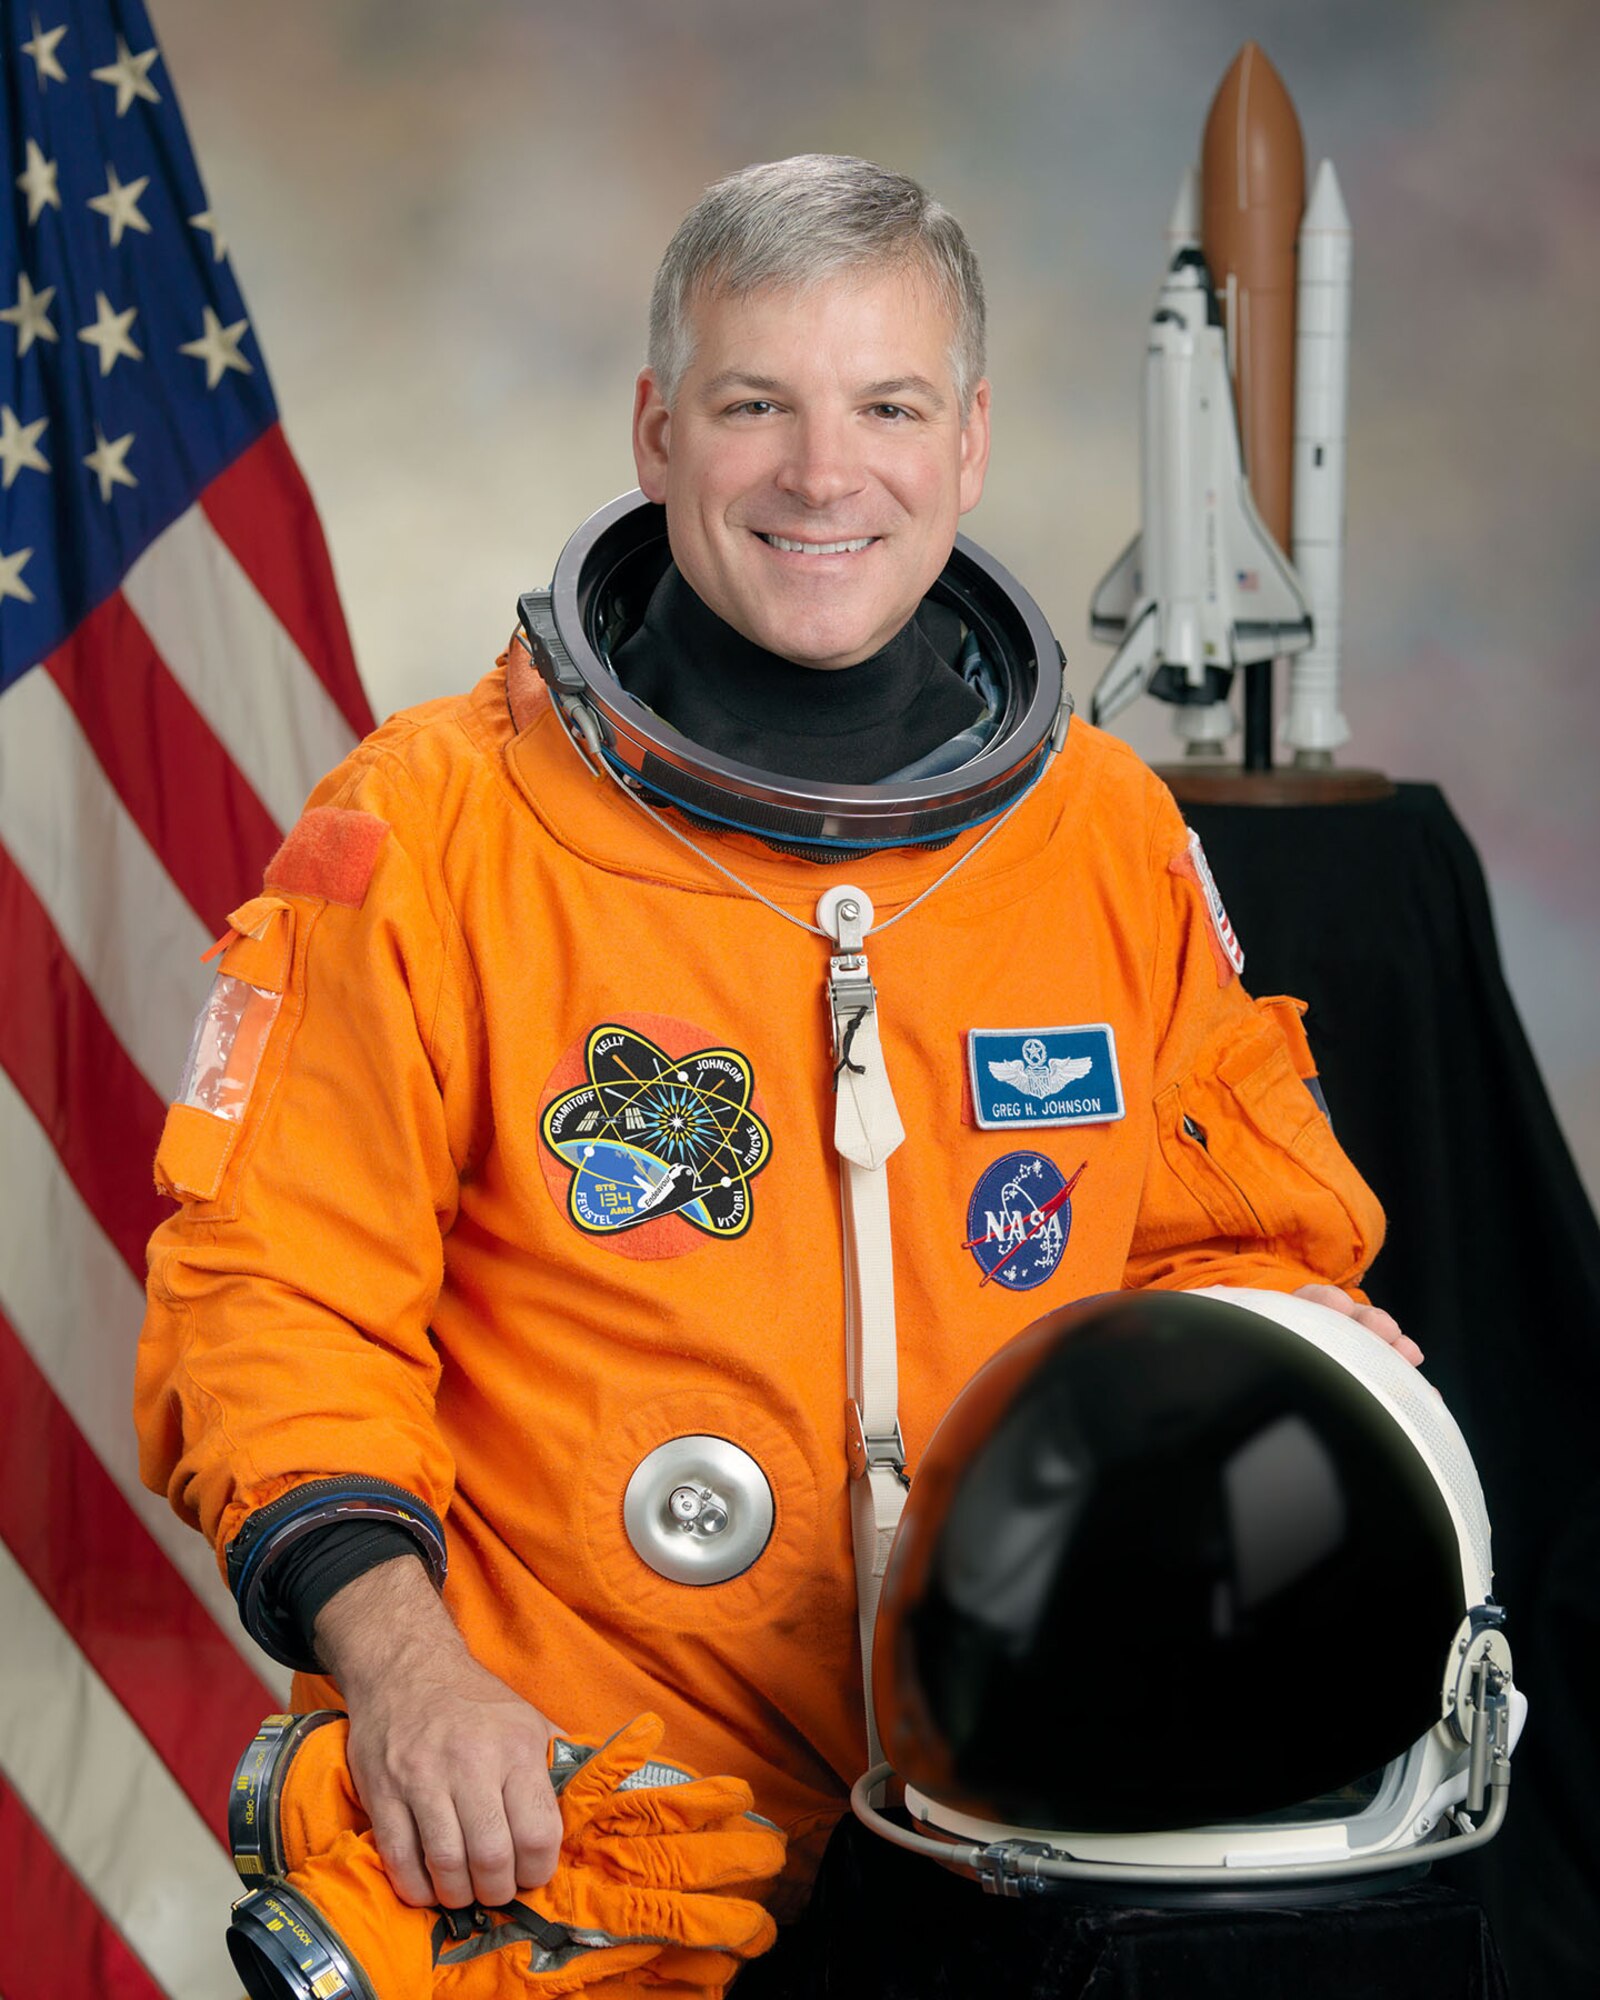 Former Astronaut and retired Air Force Colonel Gregory H. Johnson will introduce a special showing of "Gravity" (in 3D) at 7 p.m. on Friday, May 16, 2014, in the Air Force Museum Theatre as part of Space Fest at the National Museum of the U.S. Air Force. Johnson flew on several shuttle missions, including as pilot of STS-123 and STS-134 on Space Shuttle Endeavour. The theatre will charge a reduced price of $4 per person, and Johnson will answer questions after the movie. (Photo courtesy of NASA)